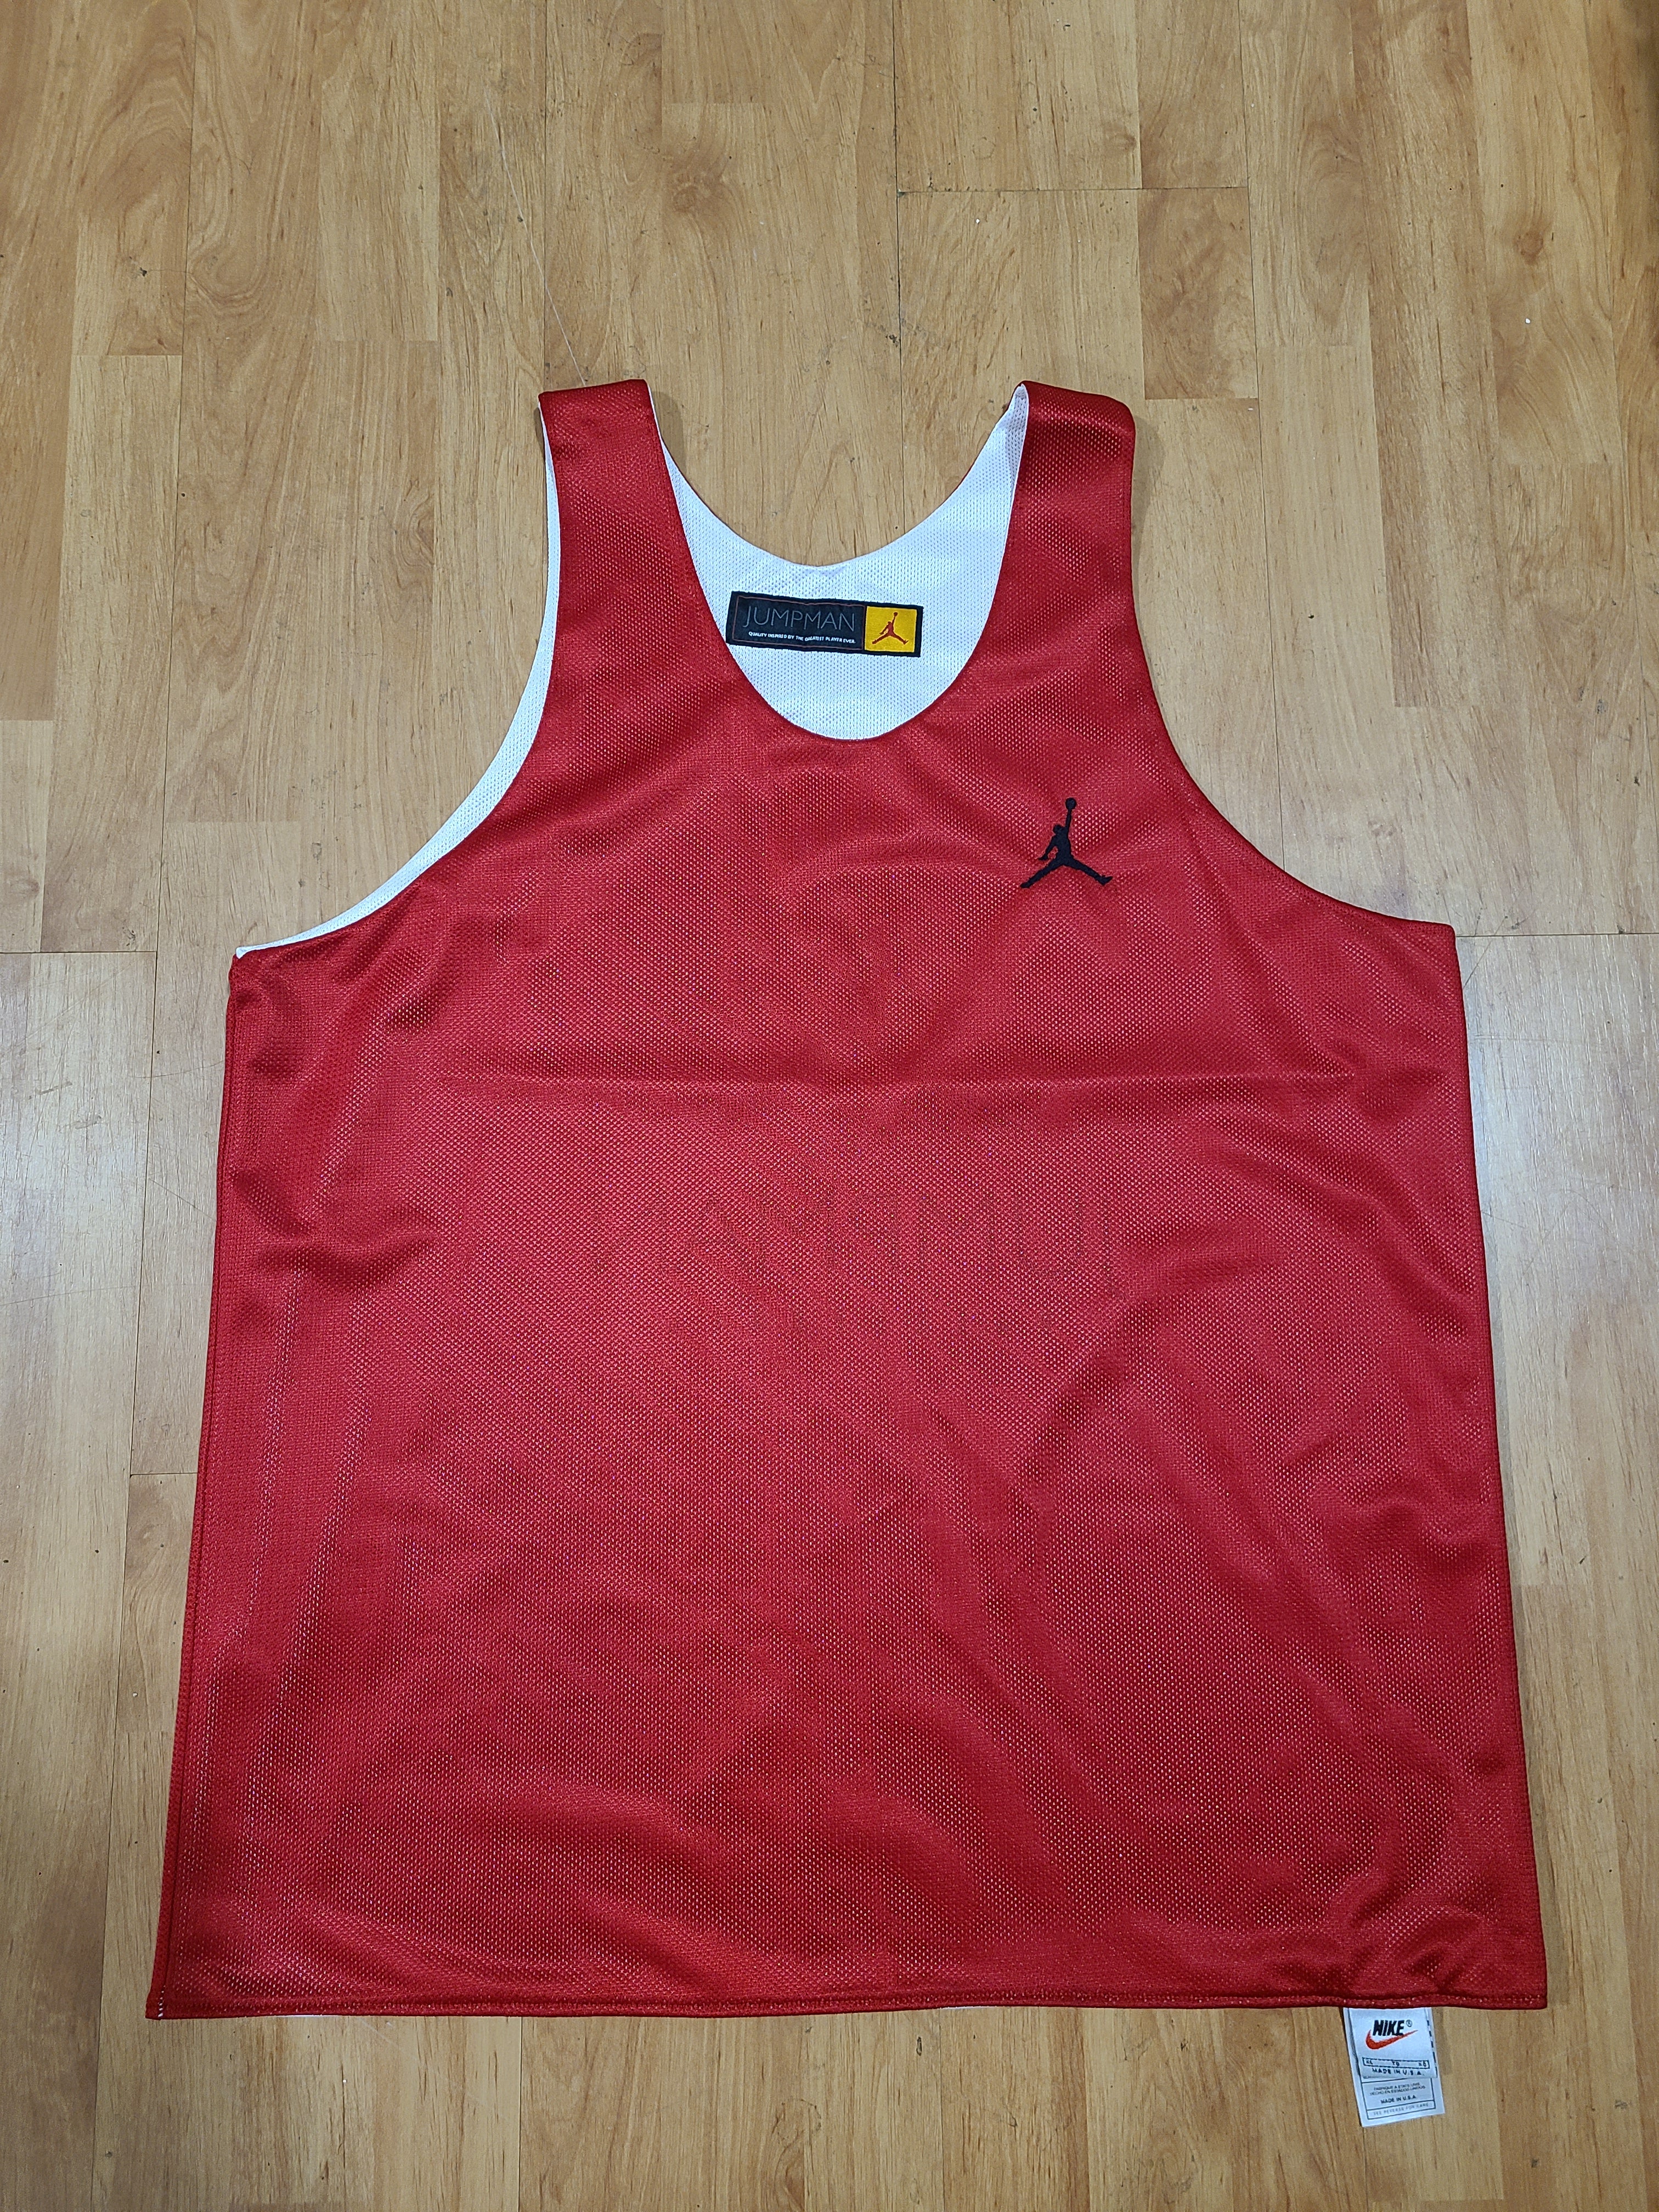 90's Nike Jordan Baseball Jersey - • Size: XL ($225) • Available Now!  ••SOLD••